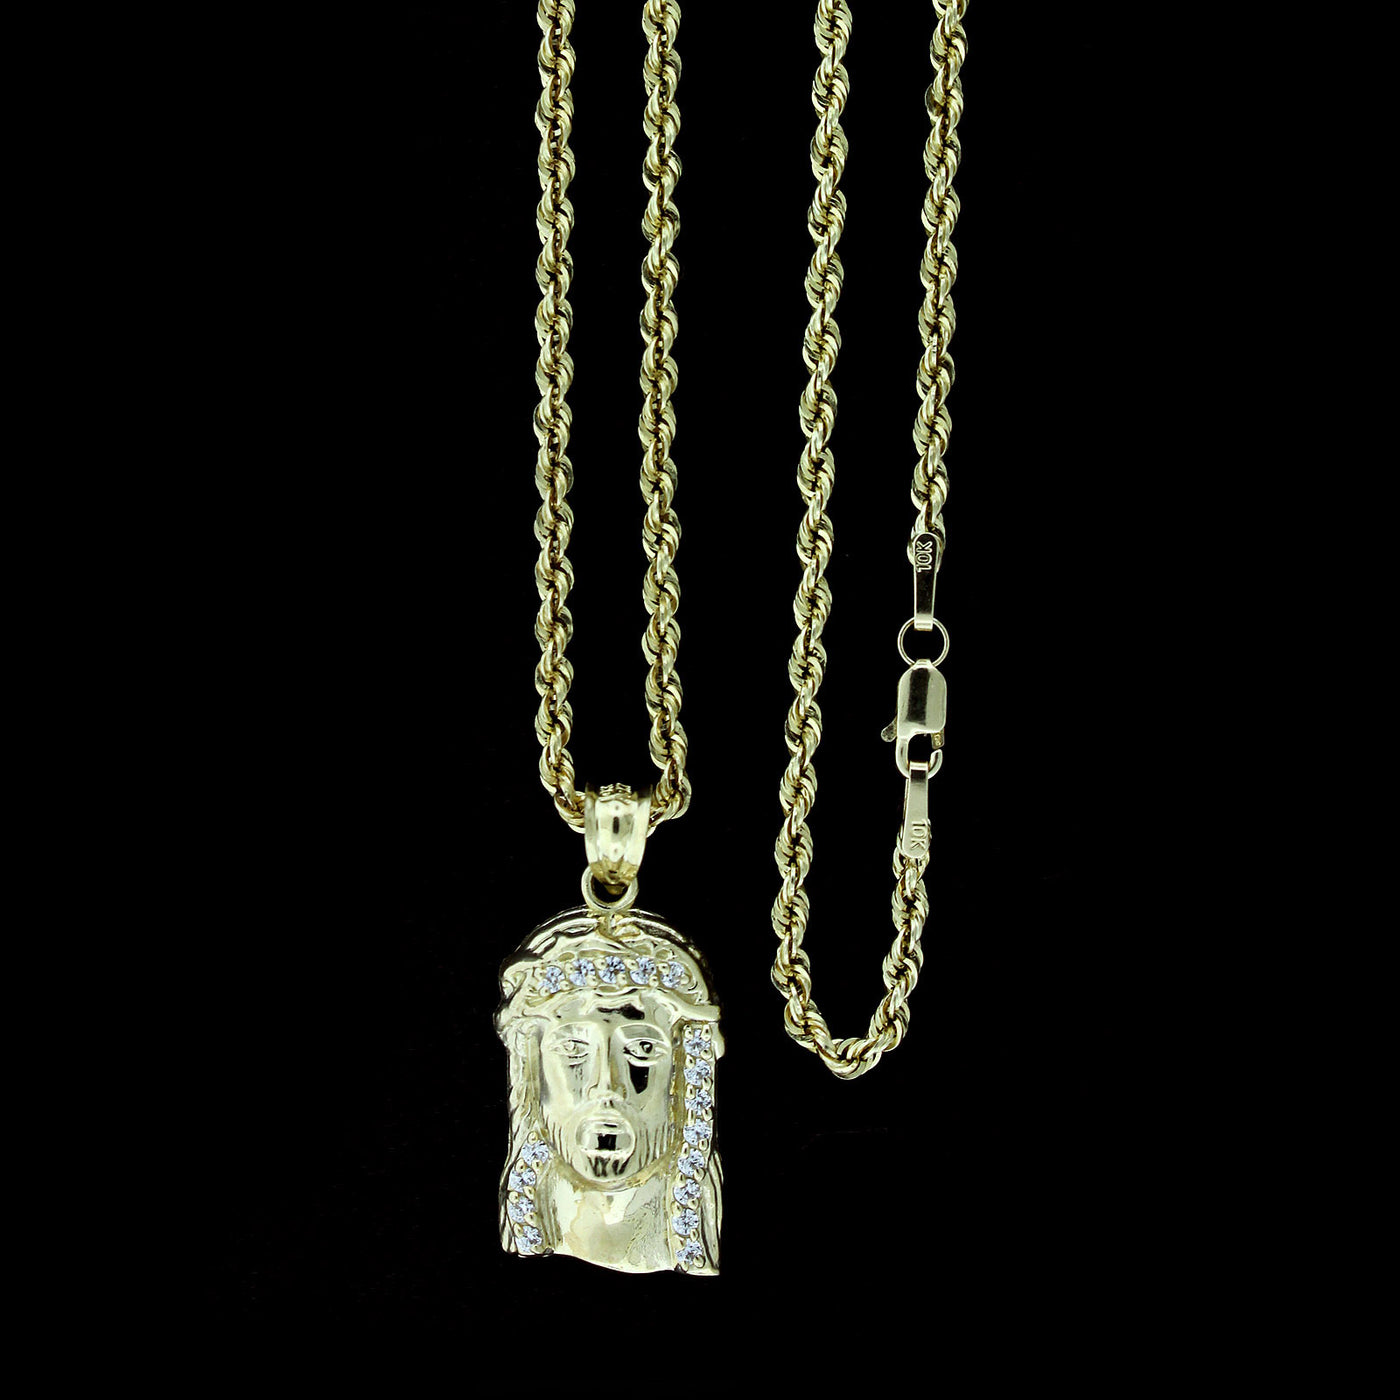 Mens 10K Solid Yellow Gold Jesus Face Head CZ Charm Pendant & 2.5mm Rope Chain Necklace Set